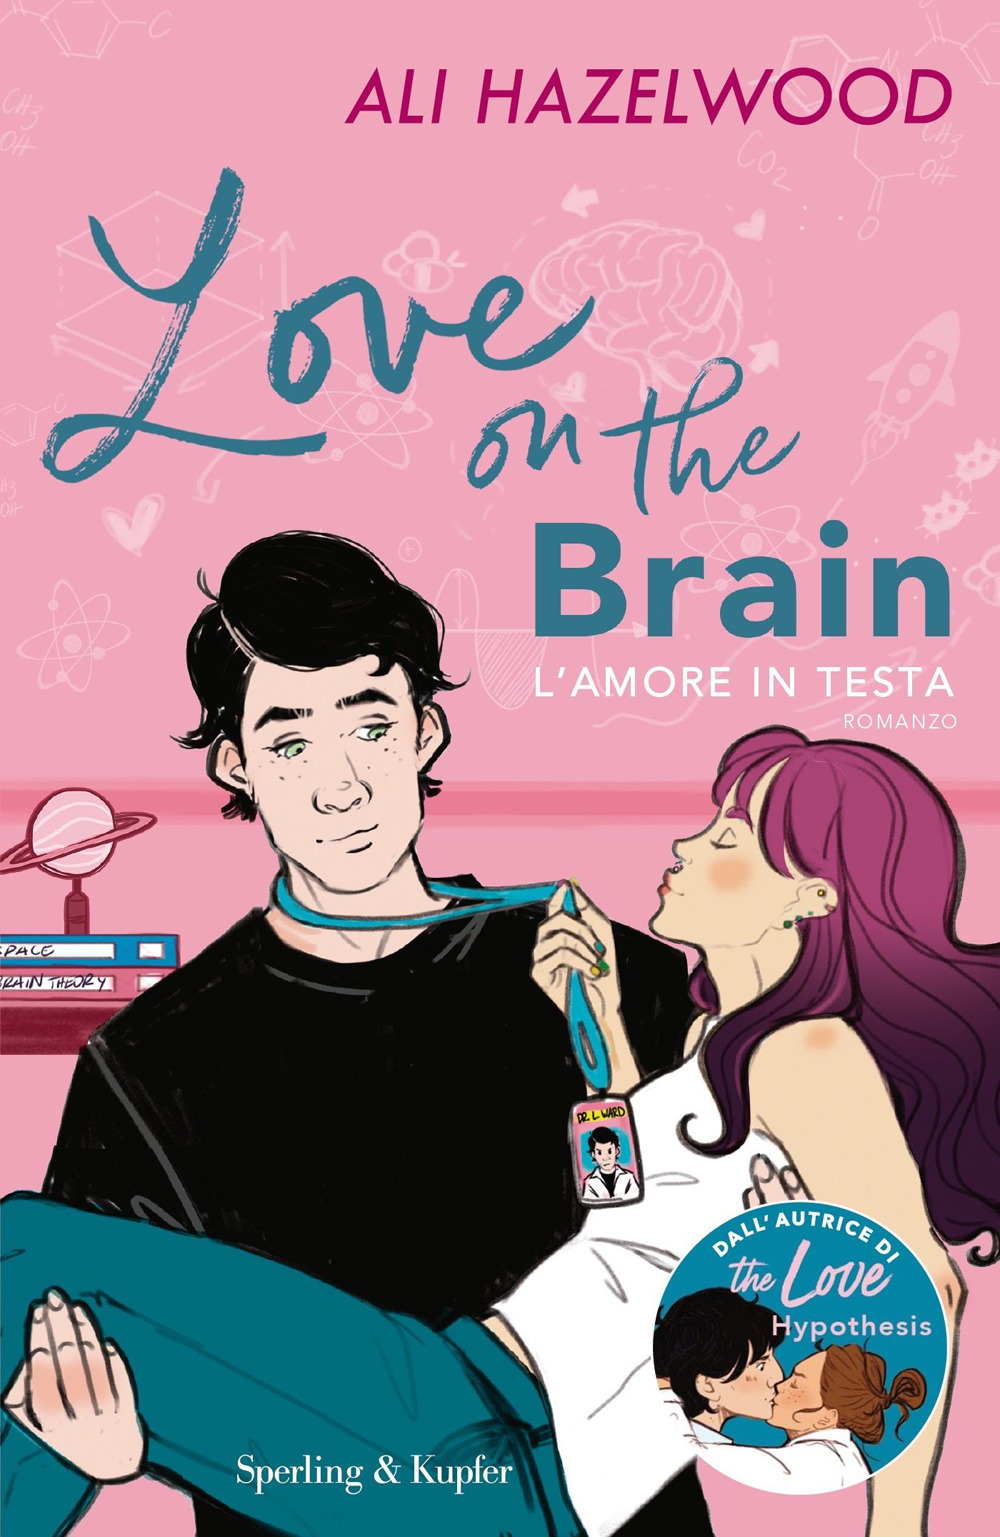 LOVE ON THE BRAIN. L’AMORE IN TESTA